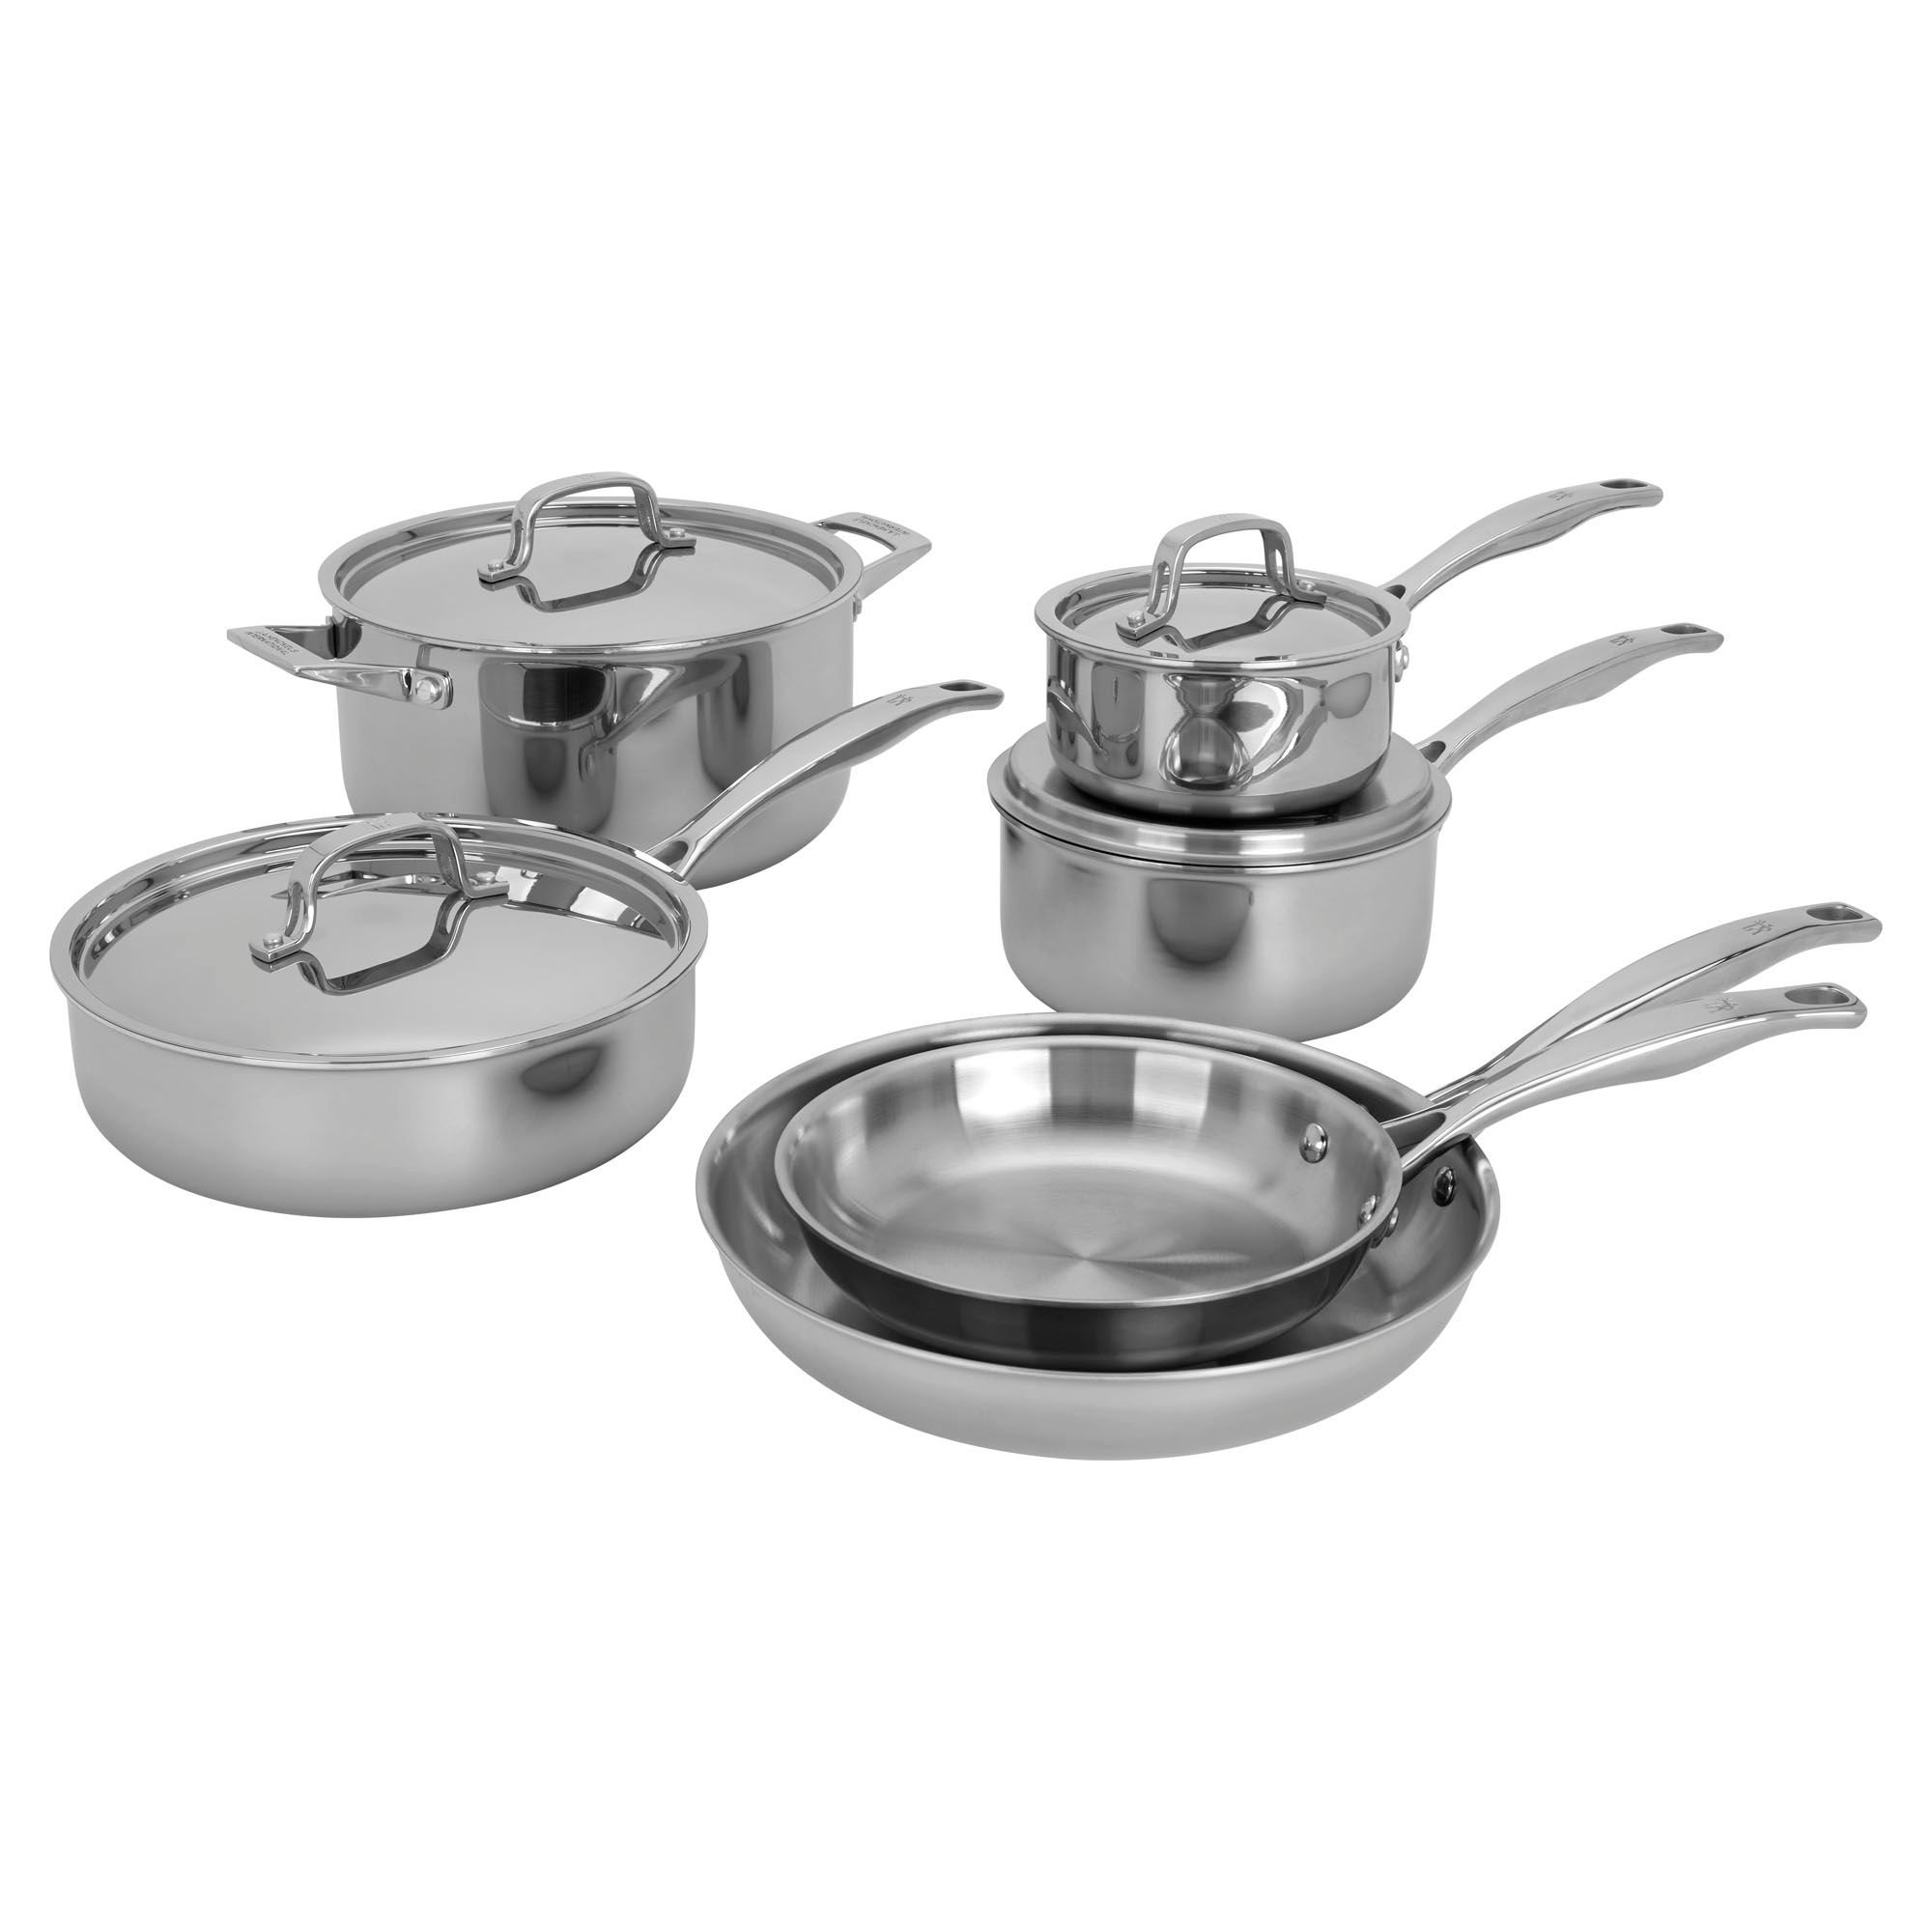 ZWILLING Clad CFX 10-pc, Non-stick, Stainless Steel Ceramic Cookware Set